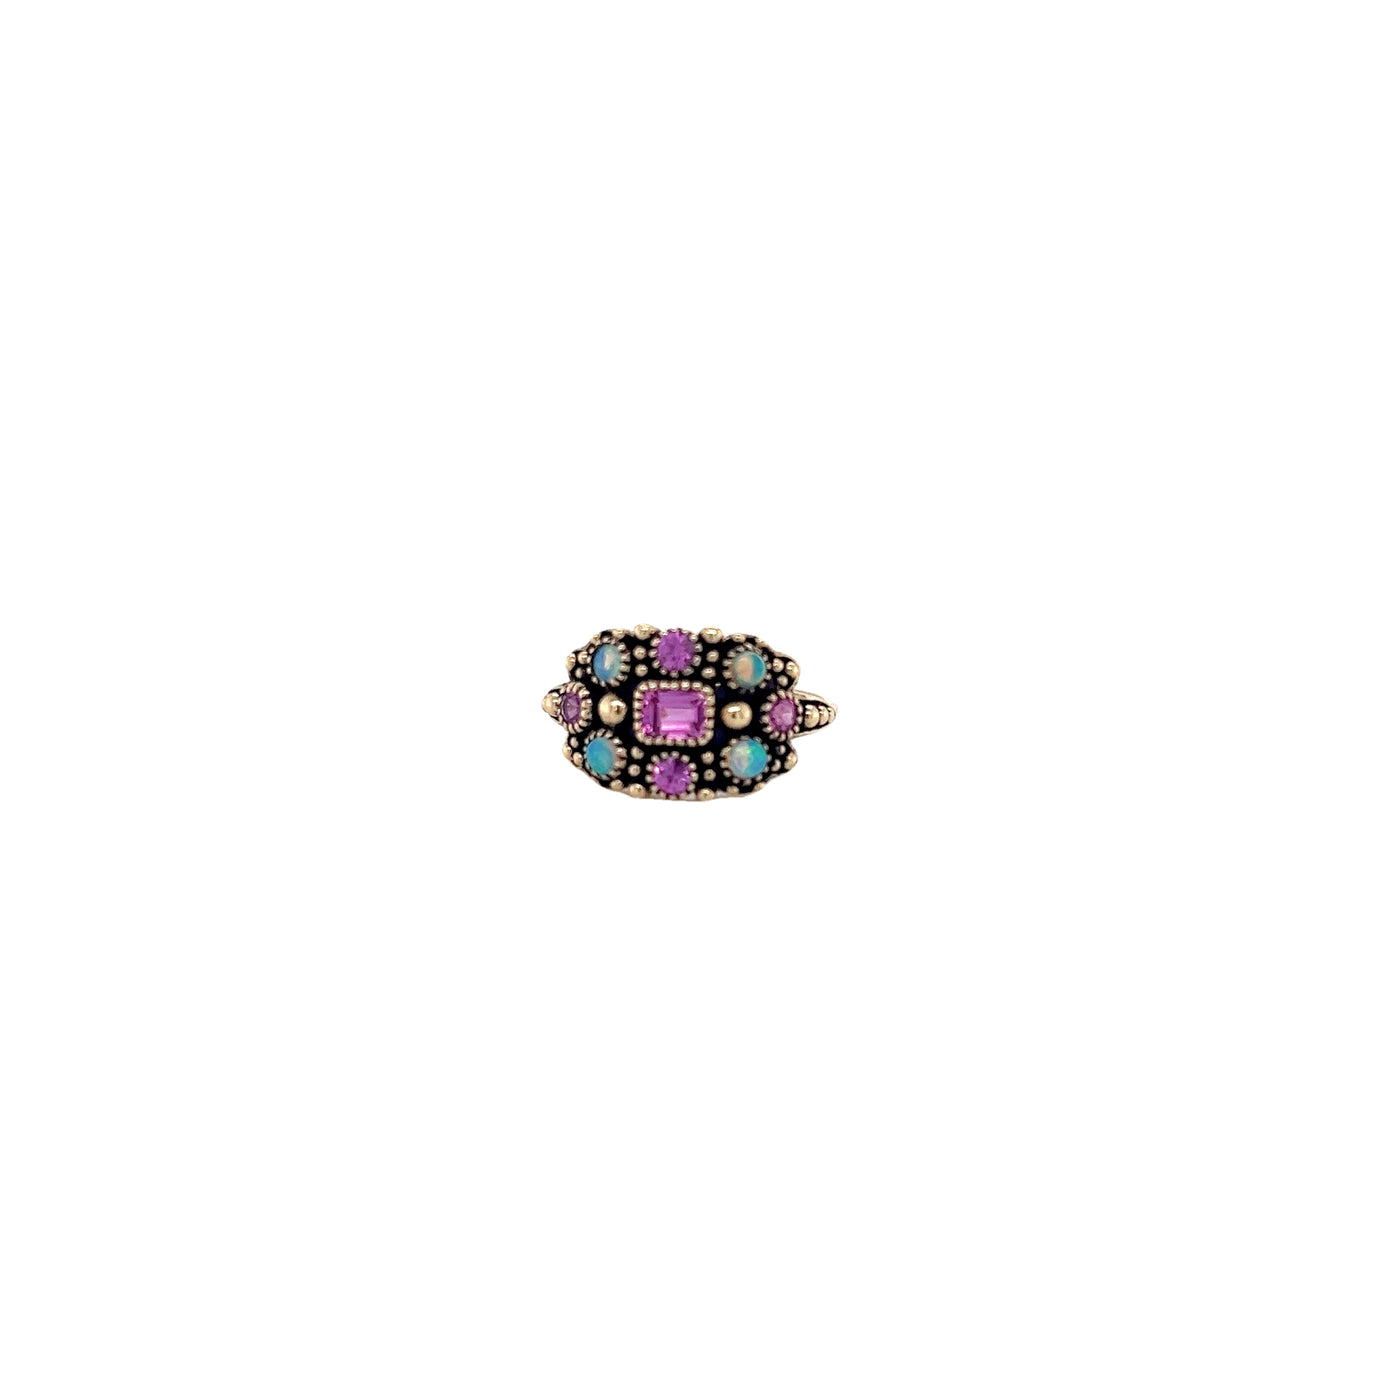 9ct yelow old pink sapphire opal ring